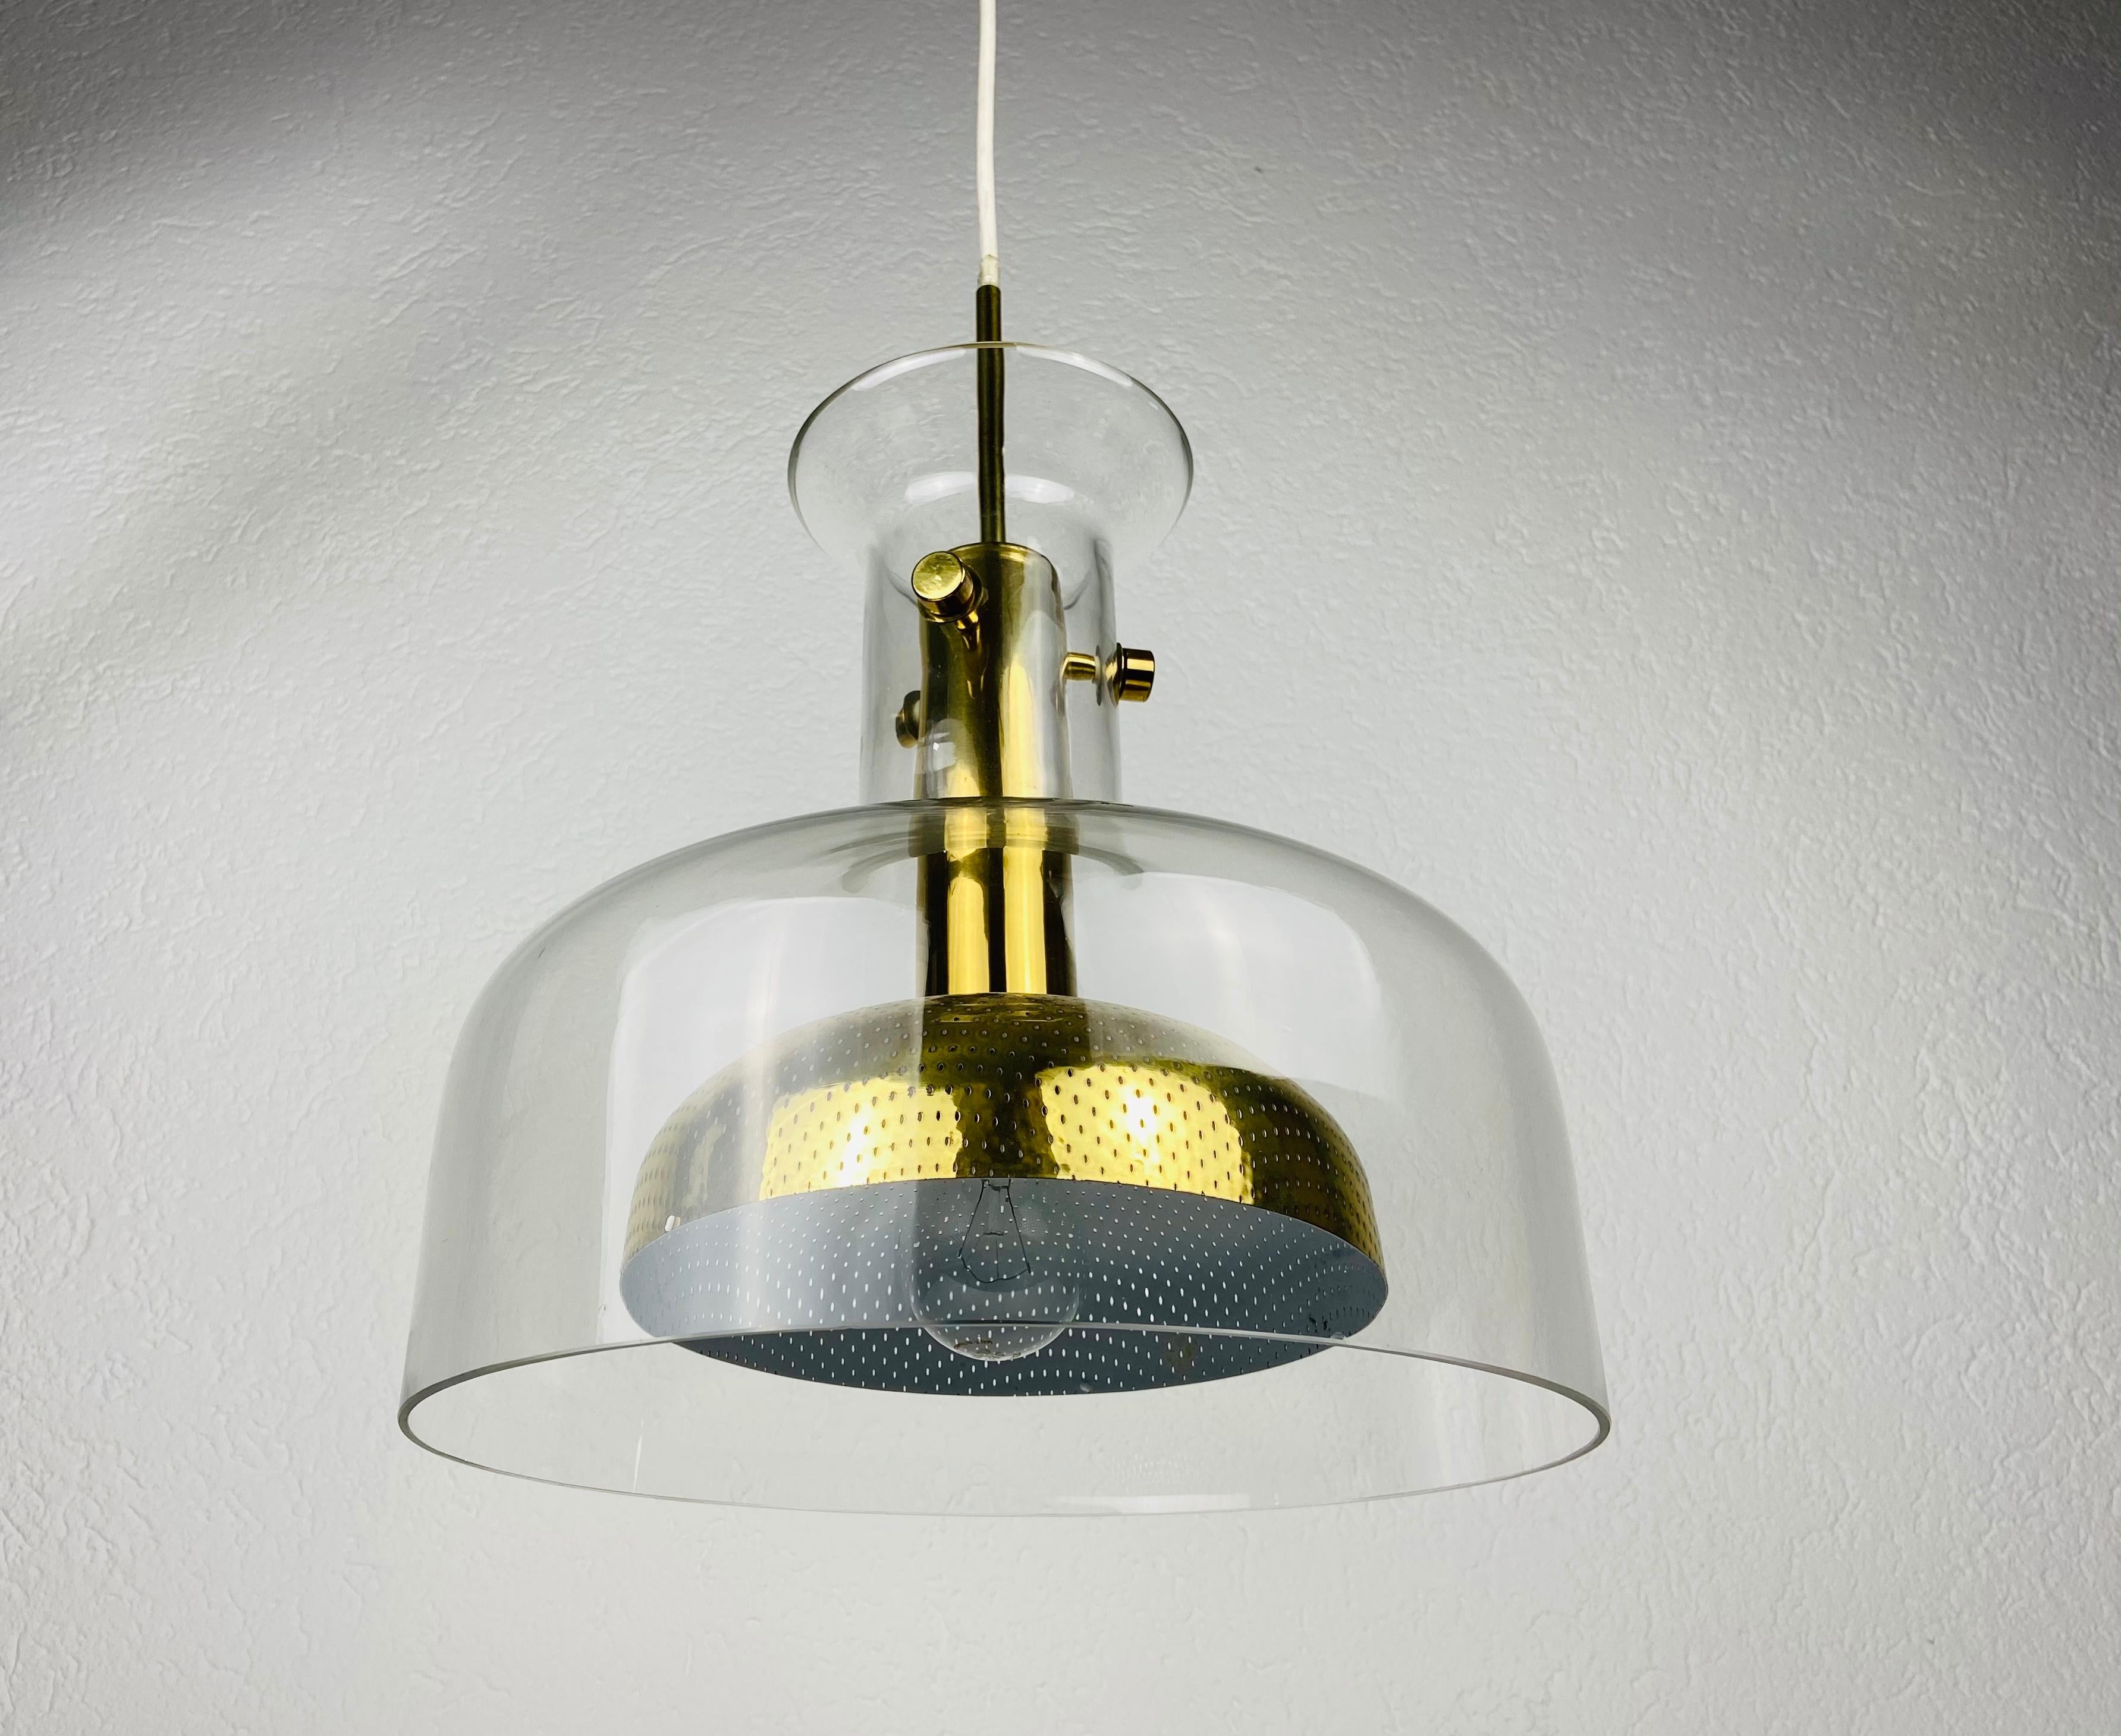 Beautiful pendant designed by Anders Pehrson and made in Sweden in the 1960s. It is fascinating with its exclusive design. The height of the lighting is adjustable.

The light requires one E26/E27 light bulb. Works with 110/120/220 V. Very good